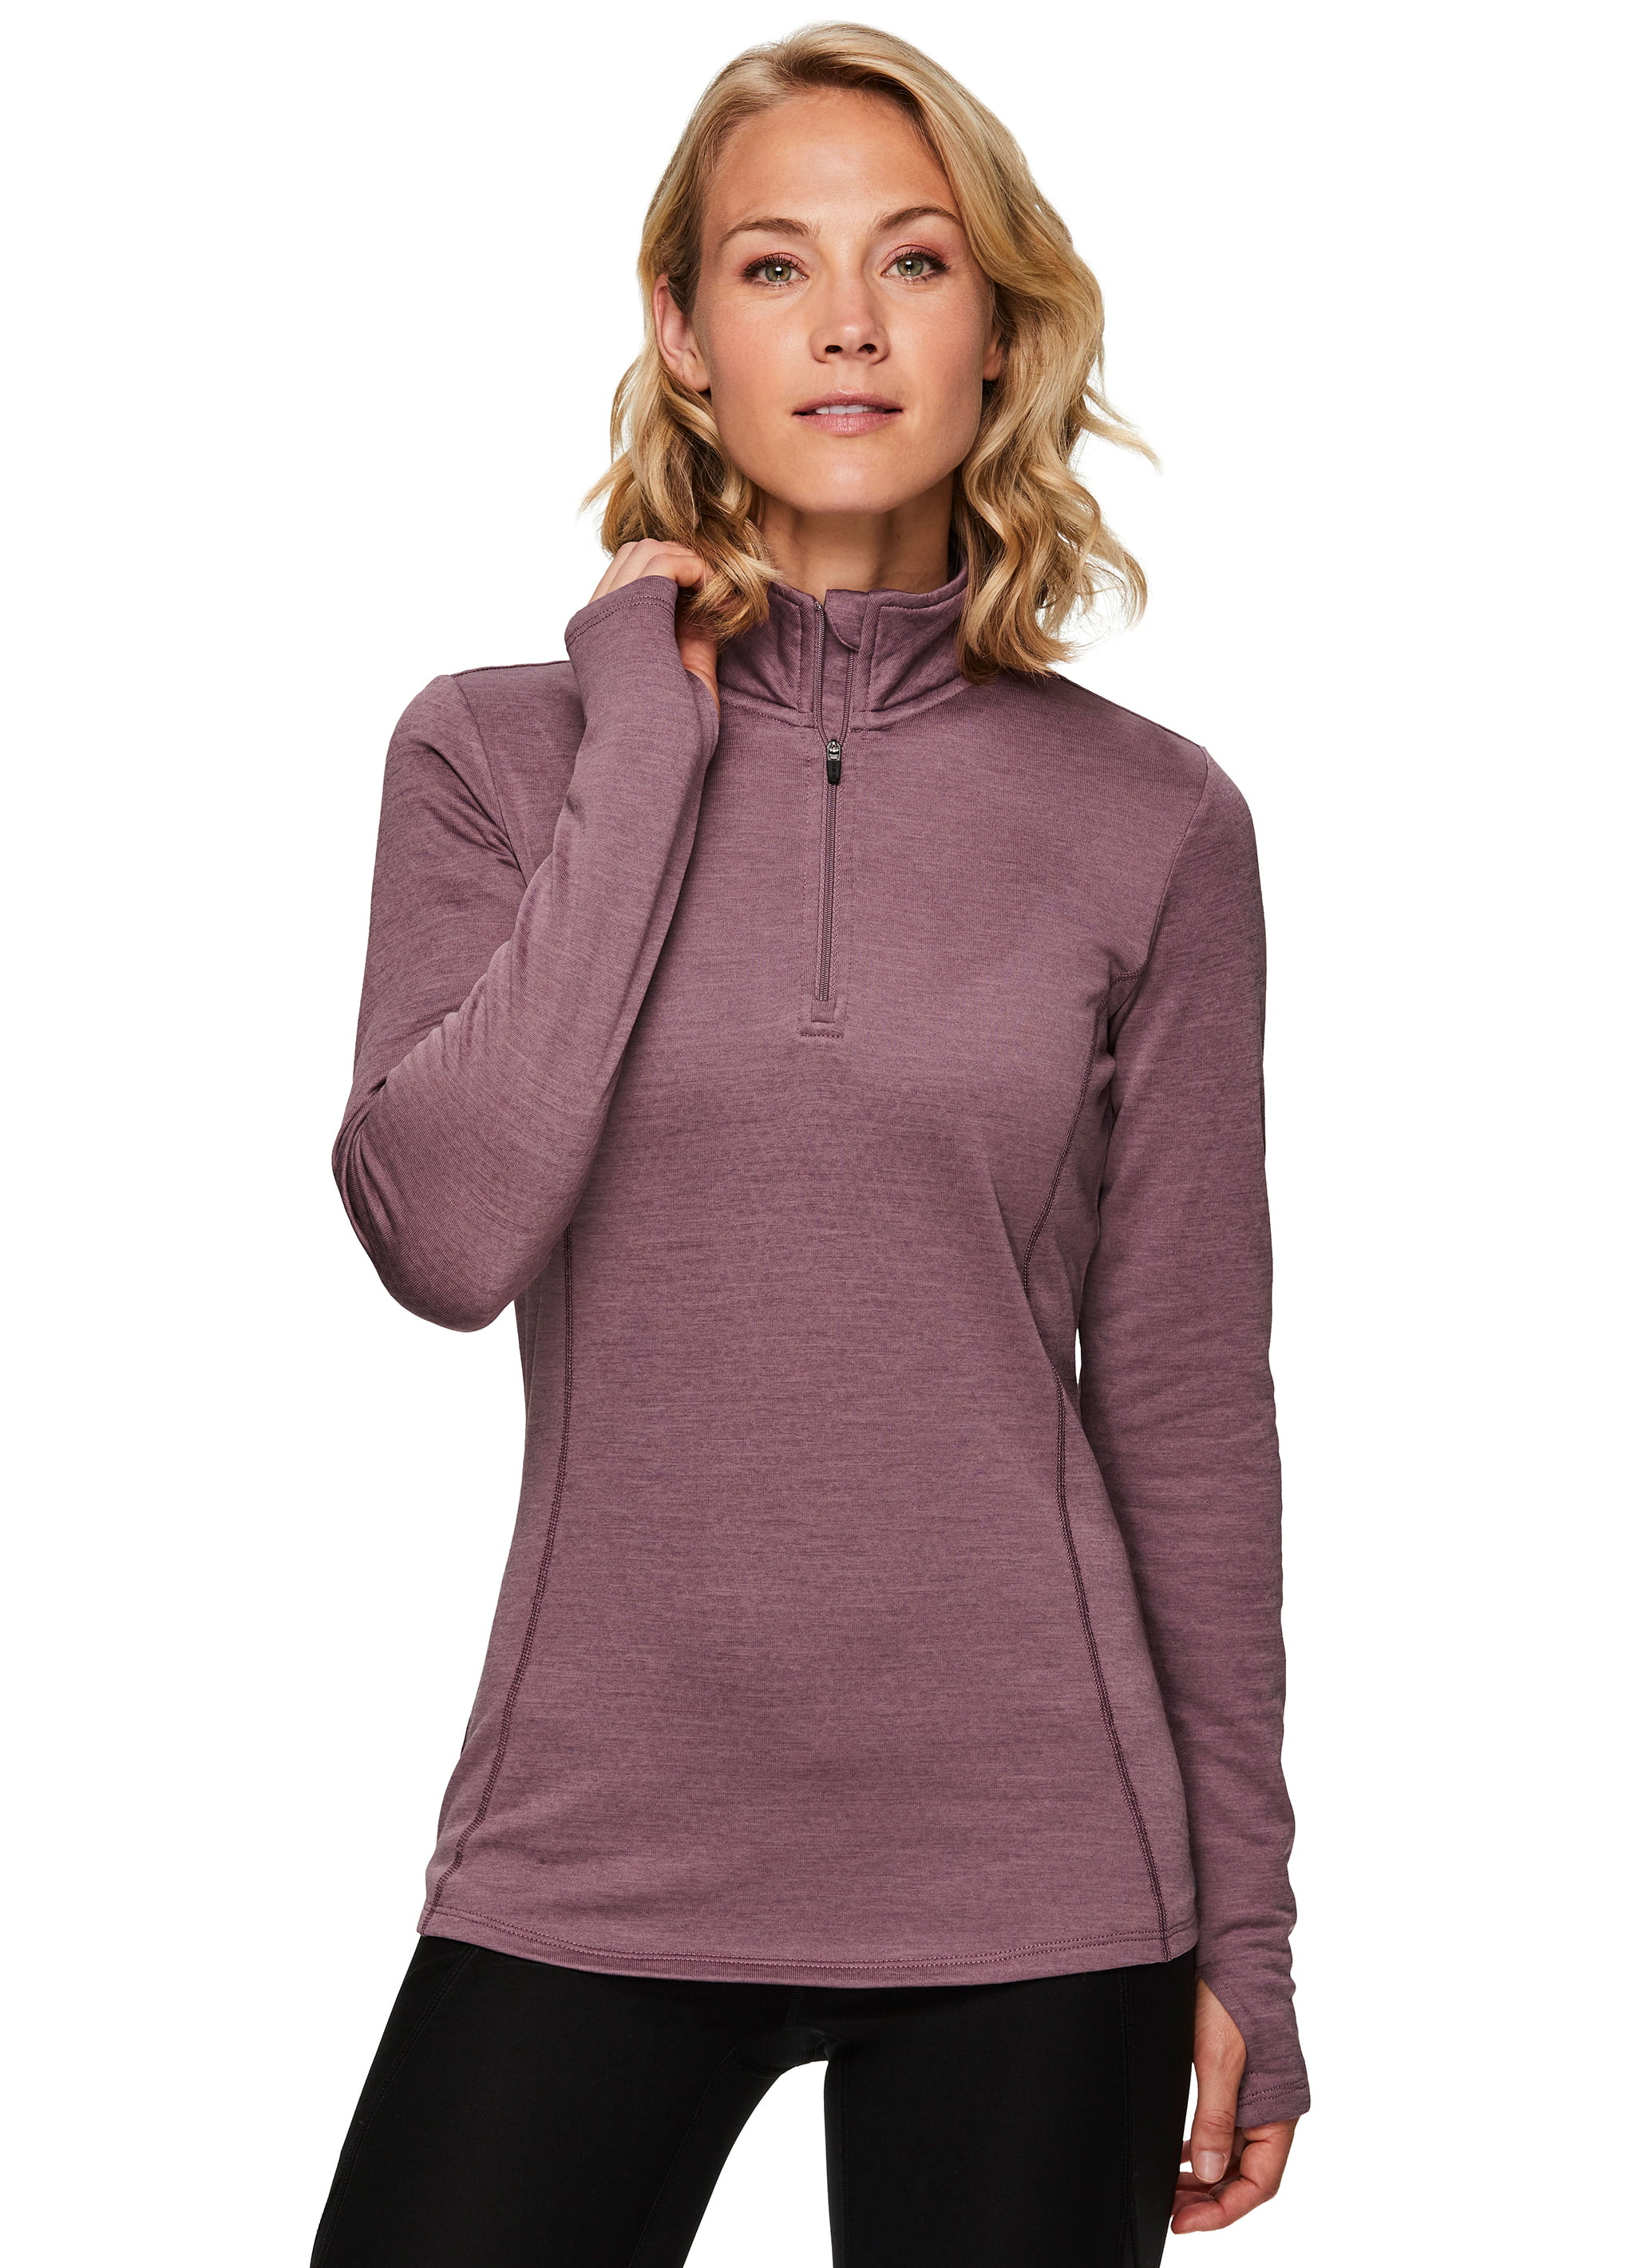 RBX - RBX Active Women's Long Sleeve Athletic Training Thermal Fleece